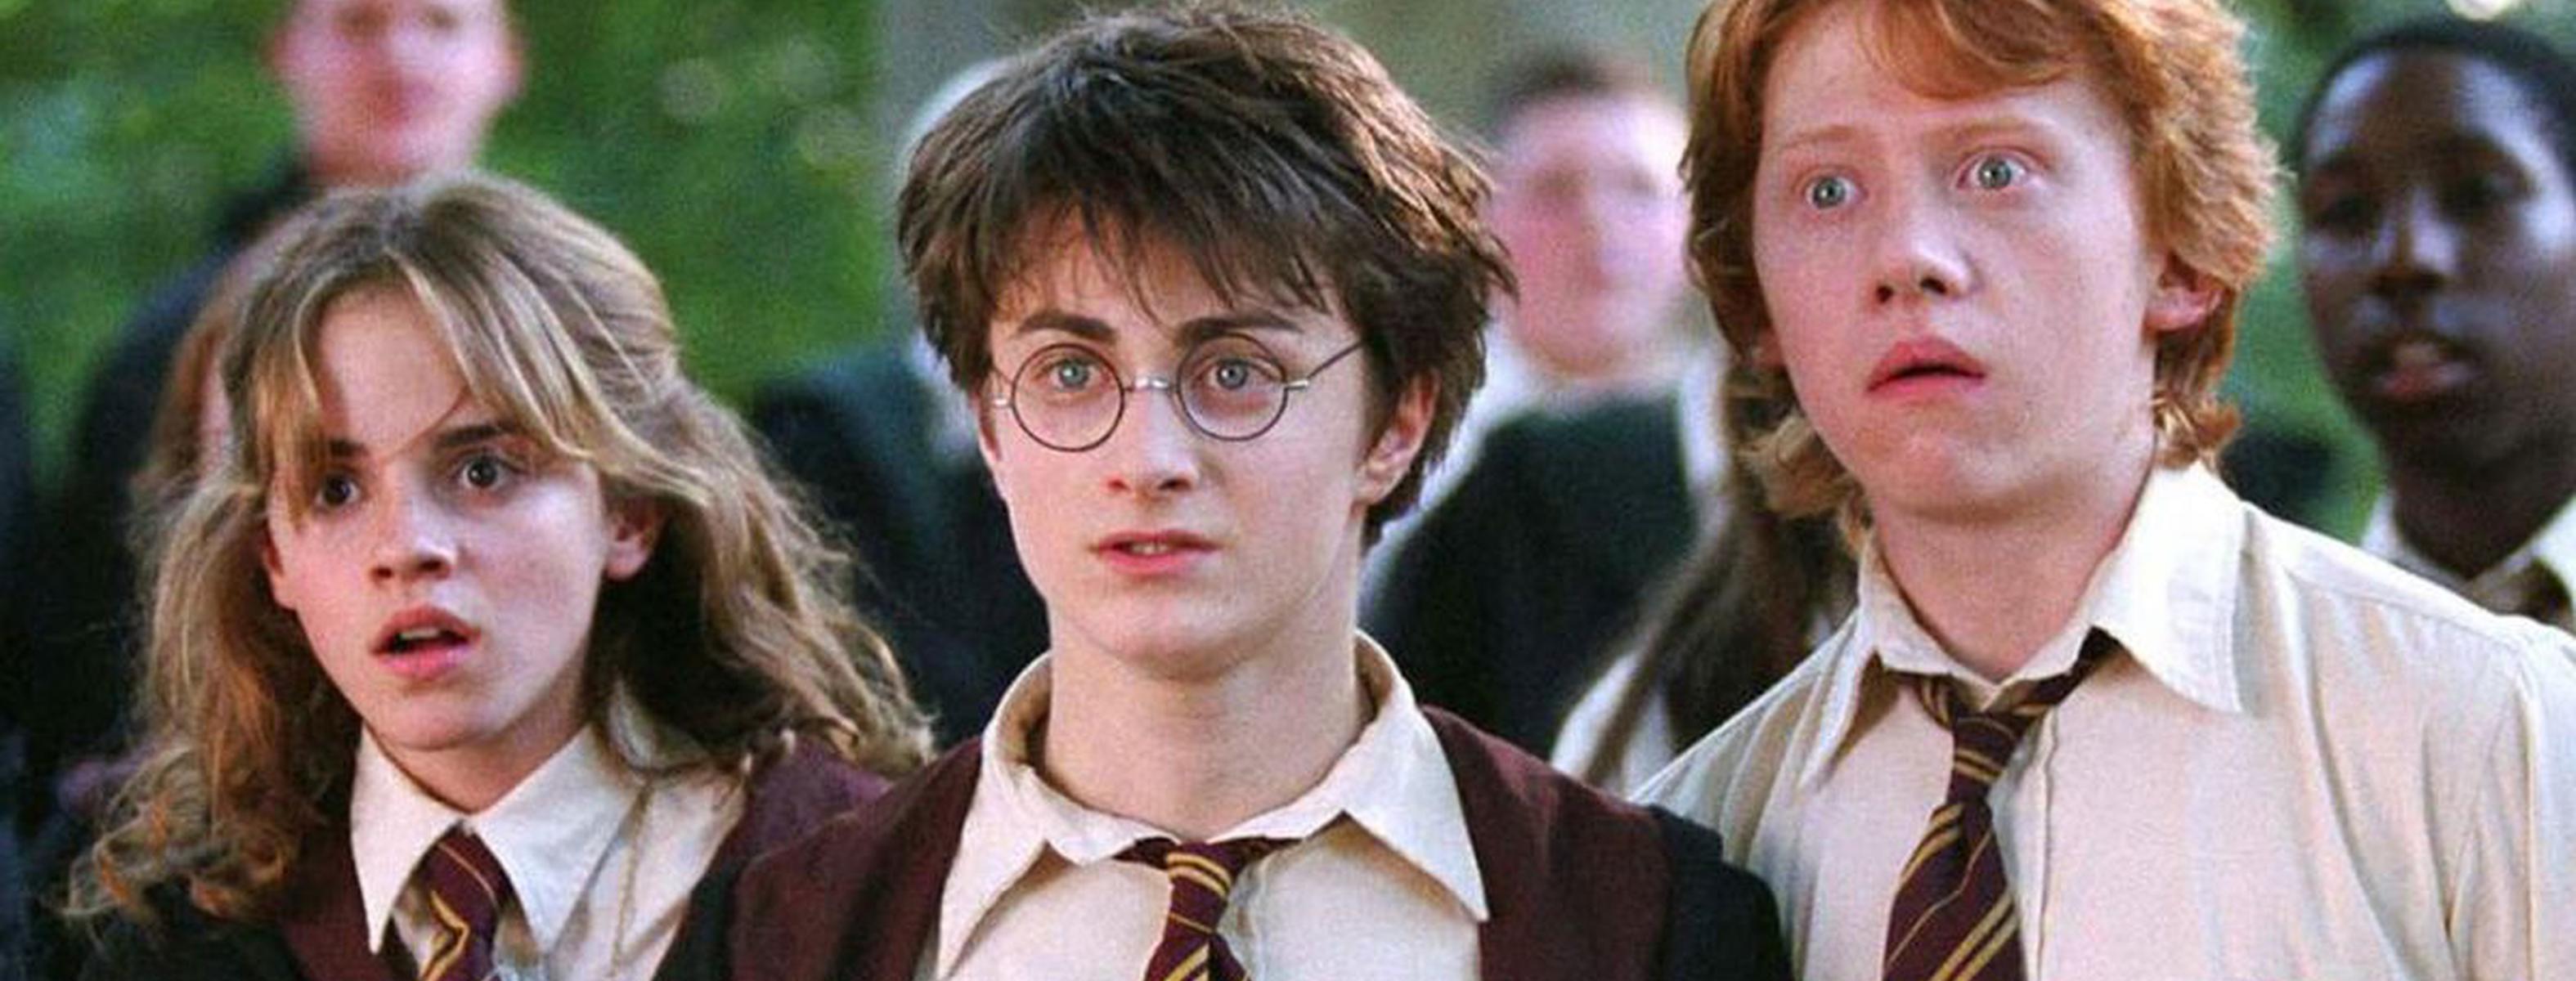 Harry Potter' Is Getting an HBO Max Series Adaptation